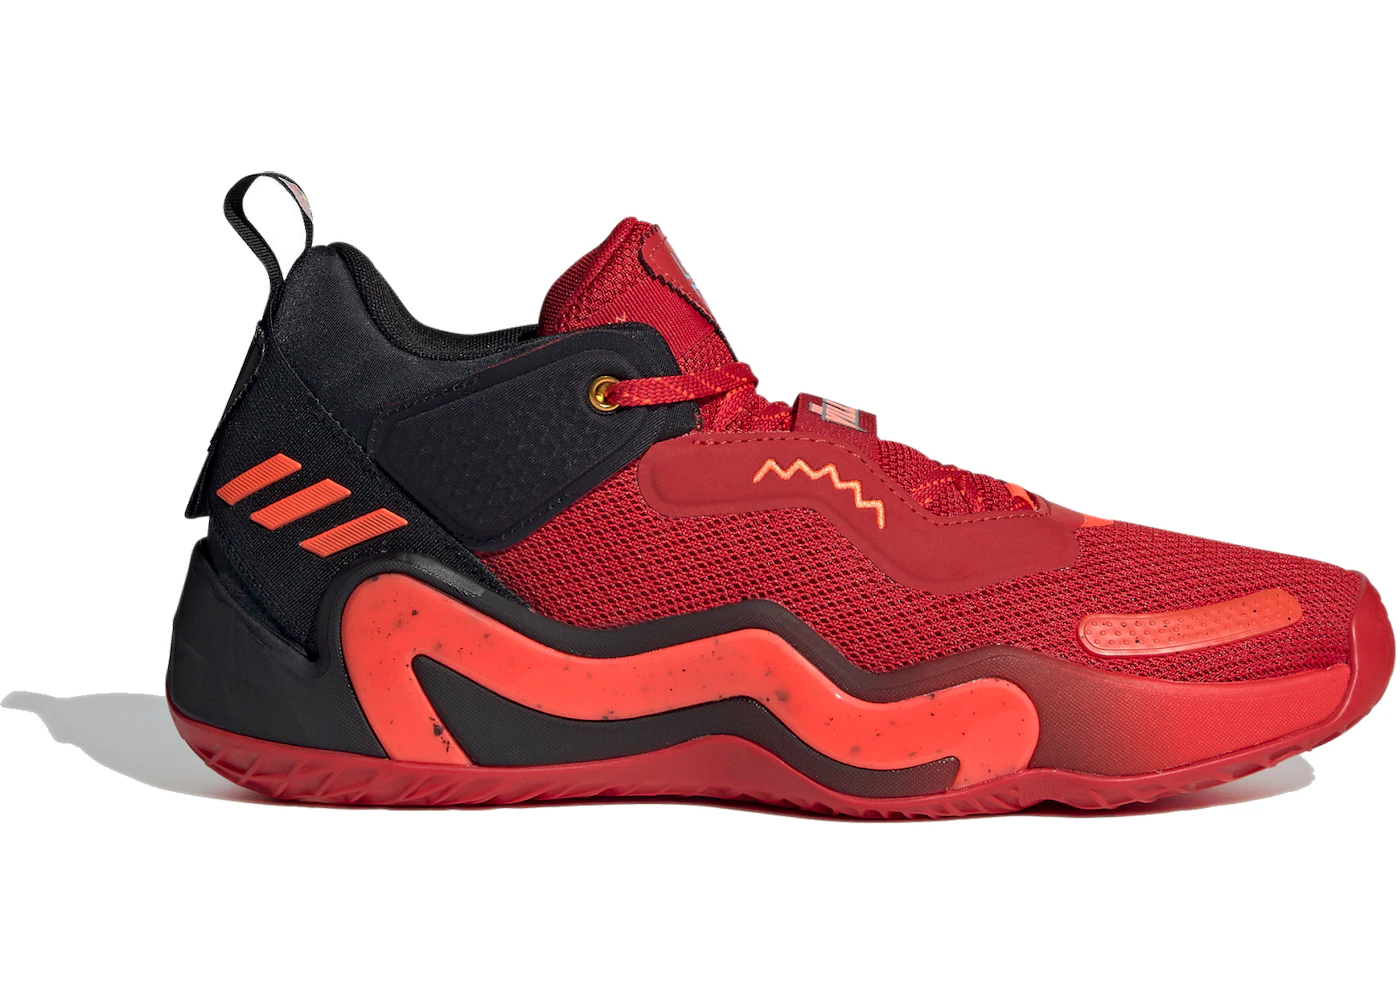 Adidas D.O.N. Issue #3 Basketball Shoes